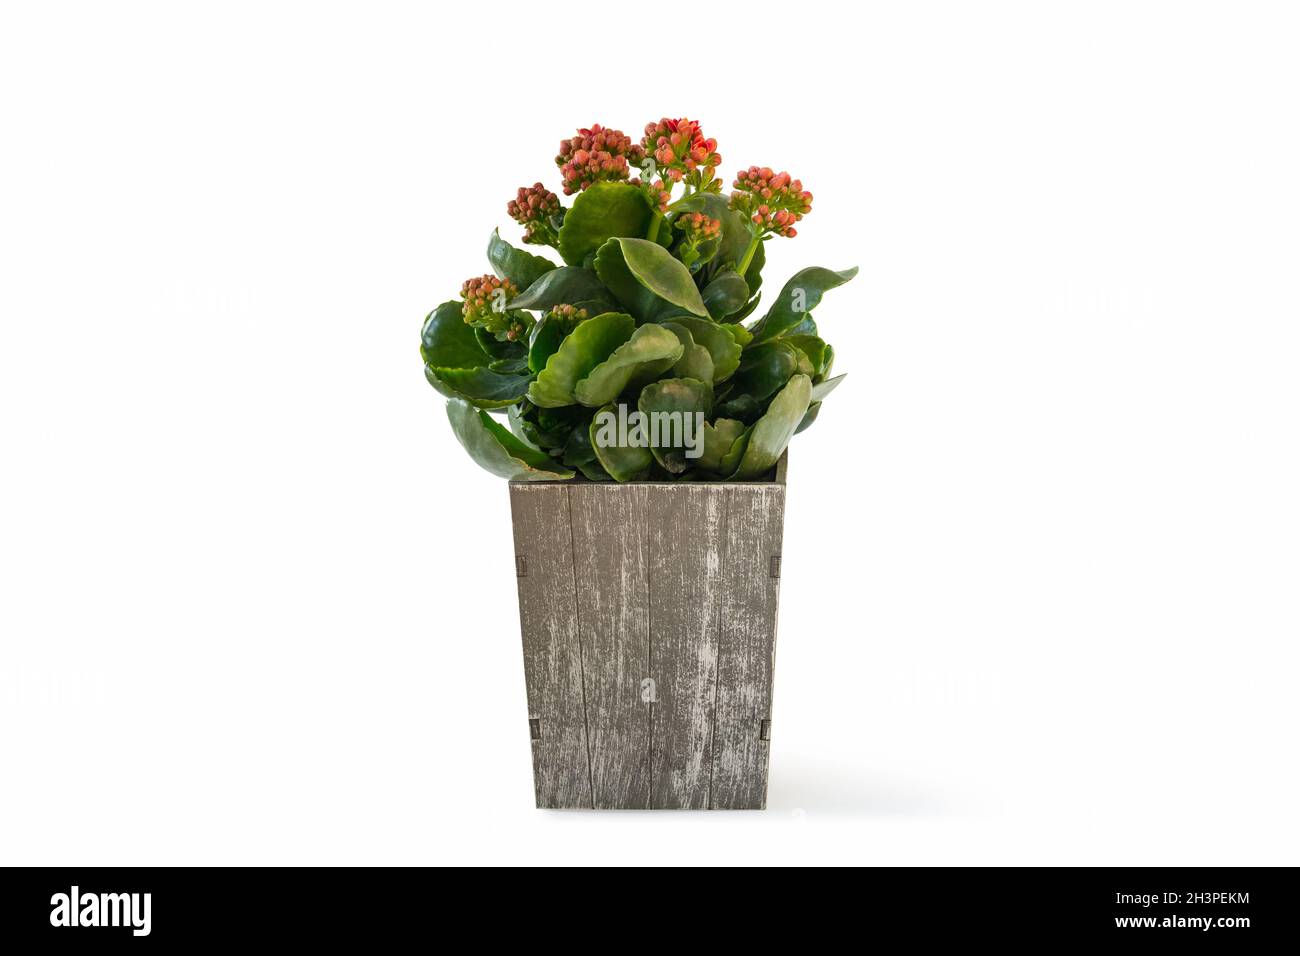 Kalanchoe plant in wooden box isolated Stock Photo